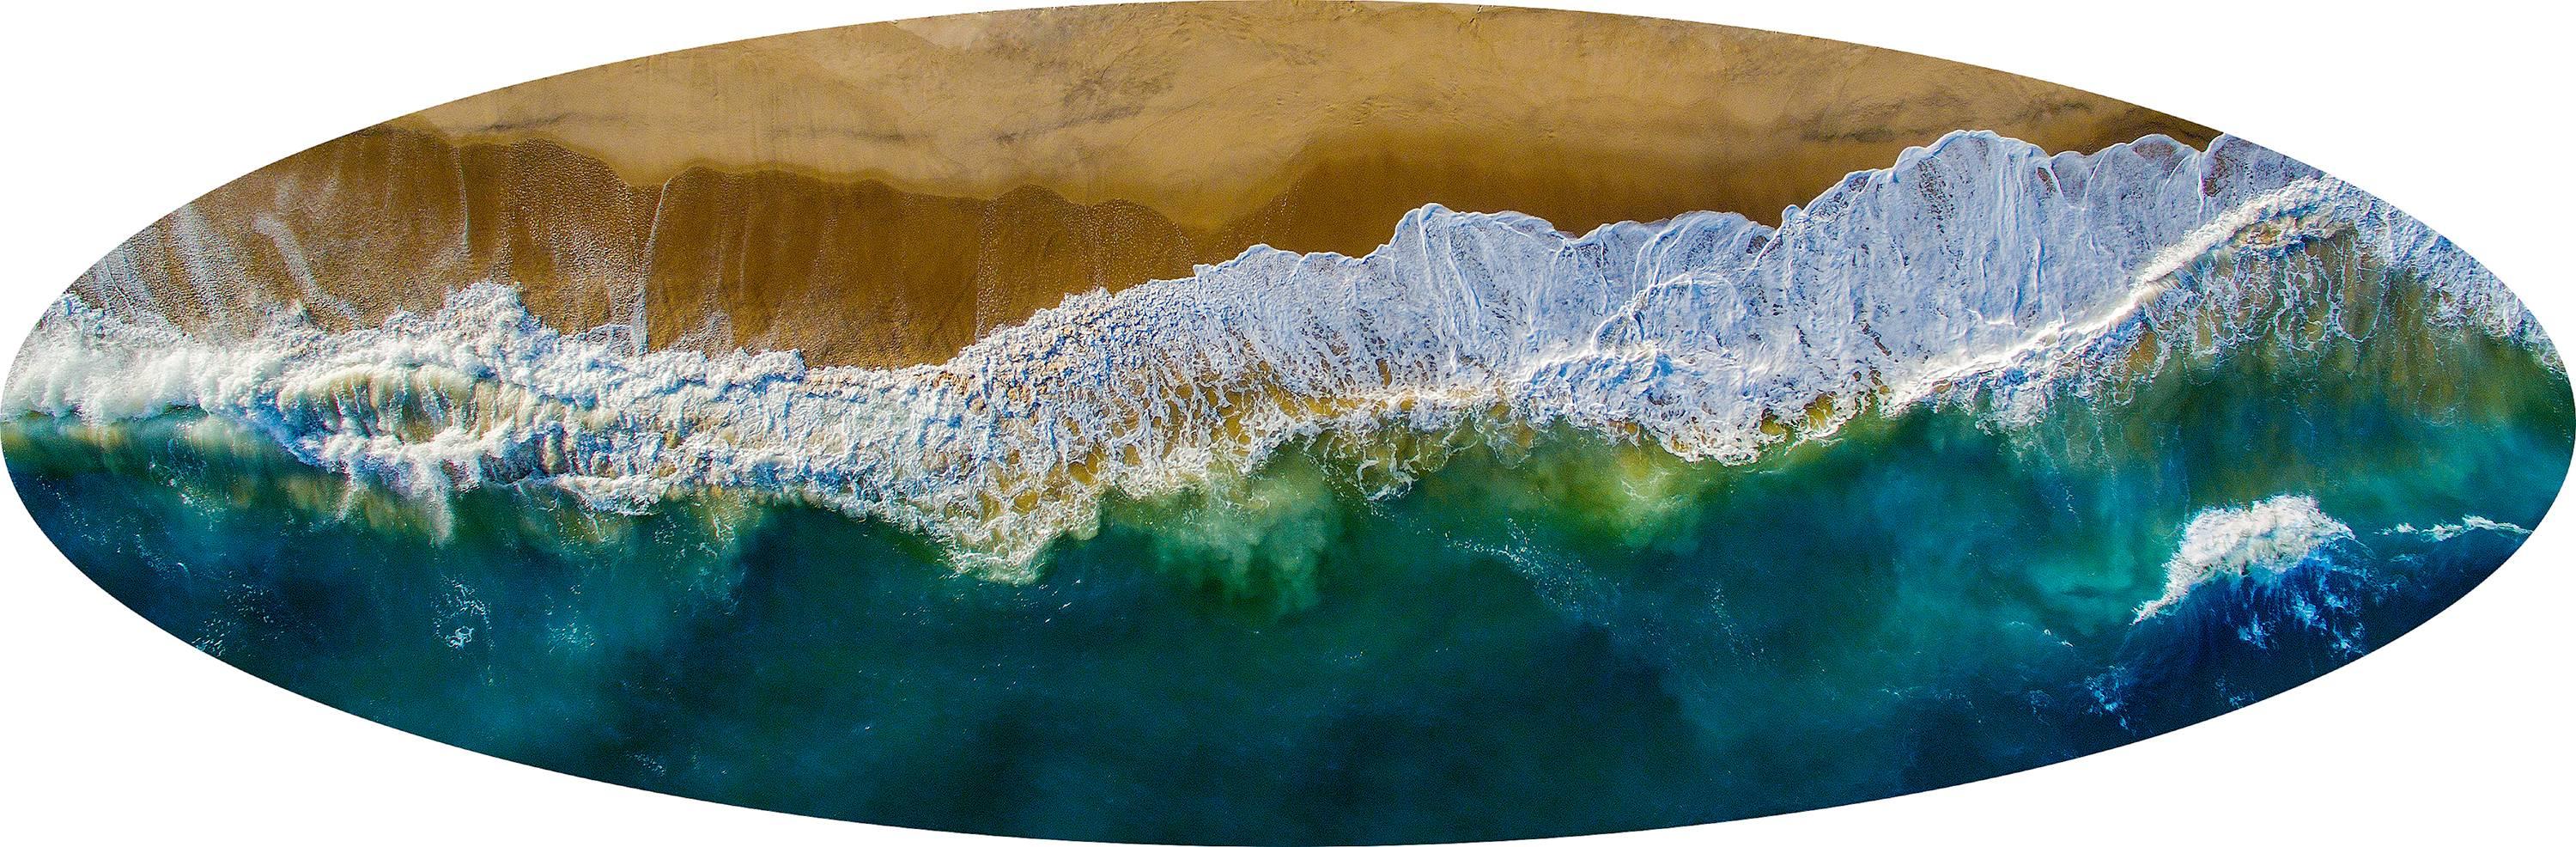 Surf in Montauk, wave, aerial view of the ocean and beach in Montauk - Photograph by Albert Delamour